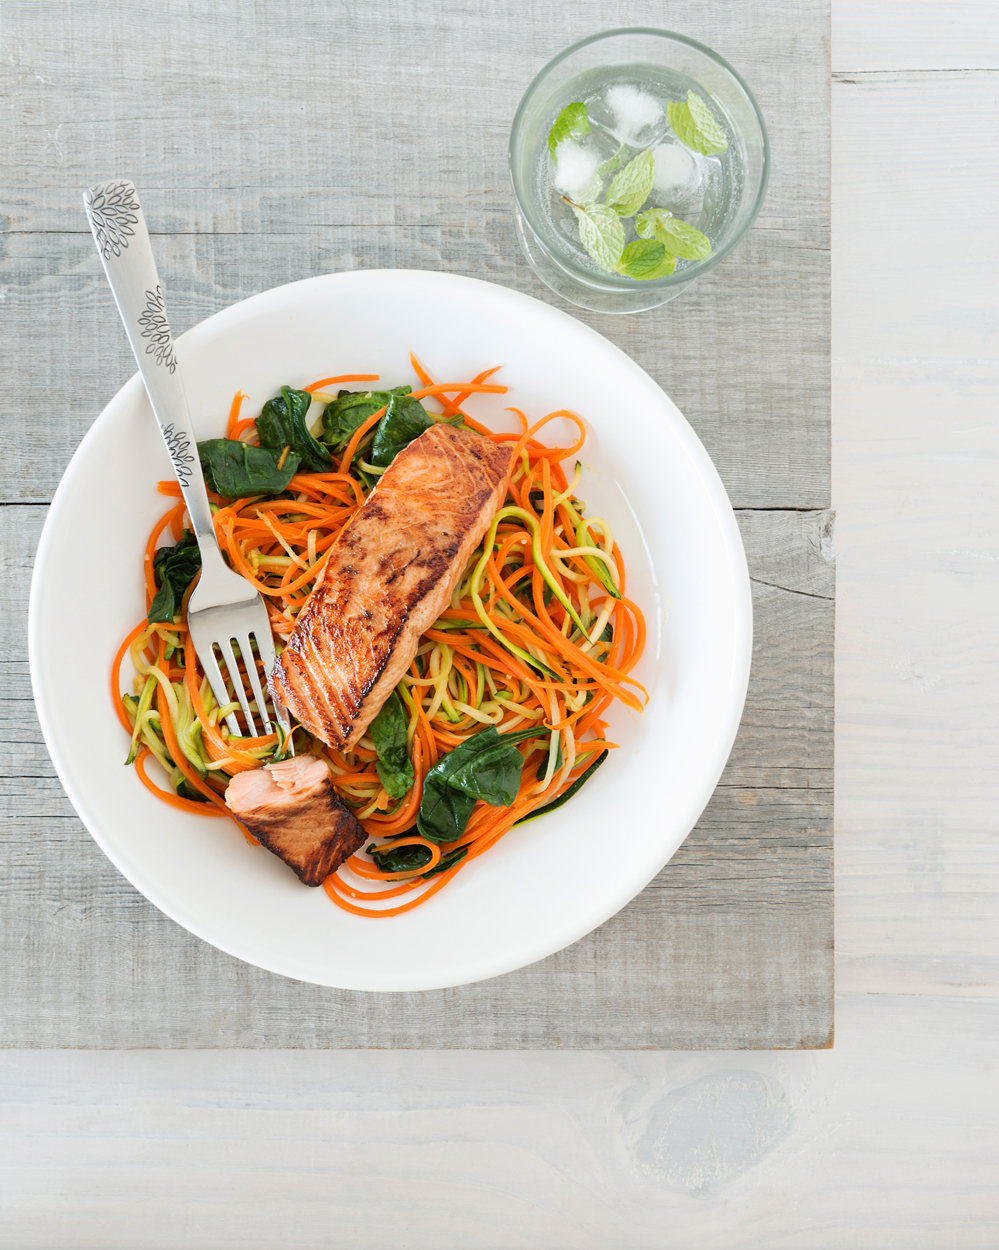 Seared Salmon With Vegetable Noodles